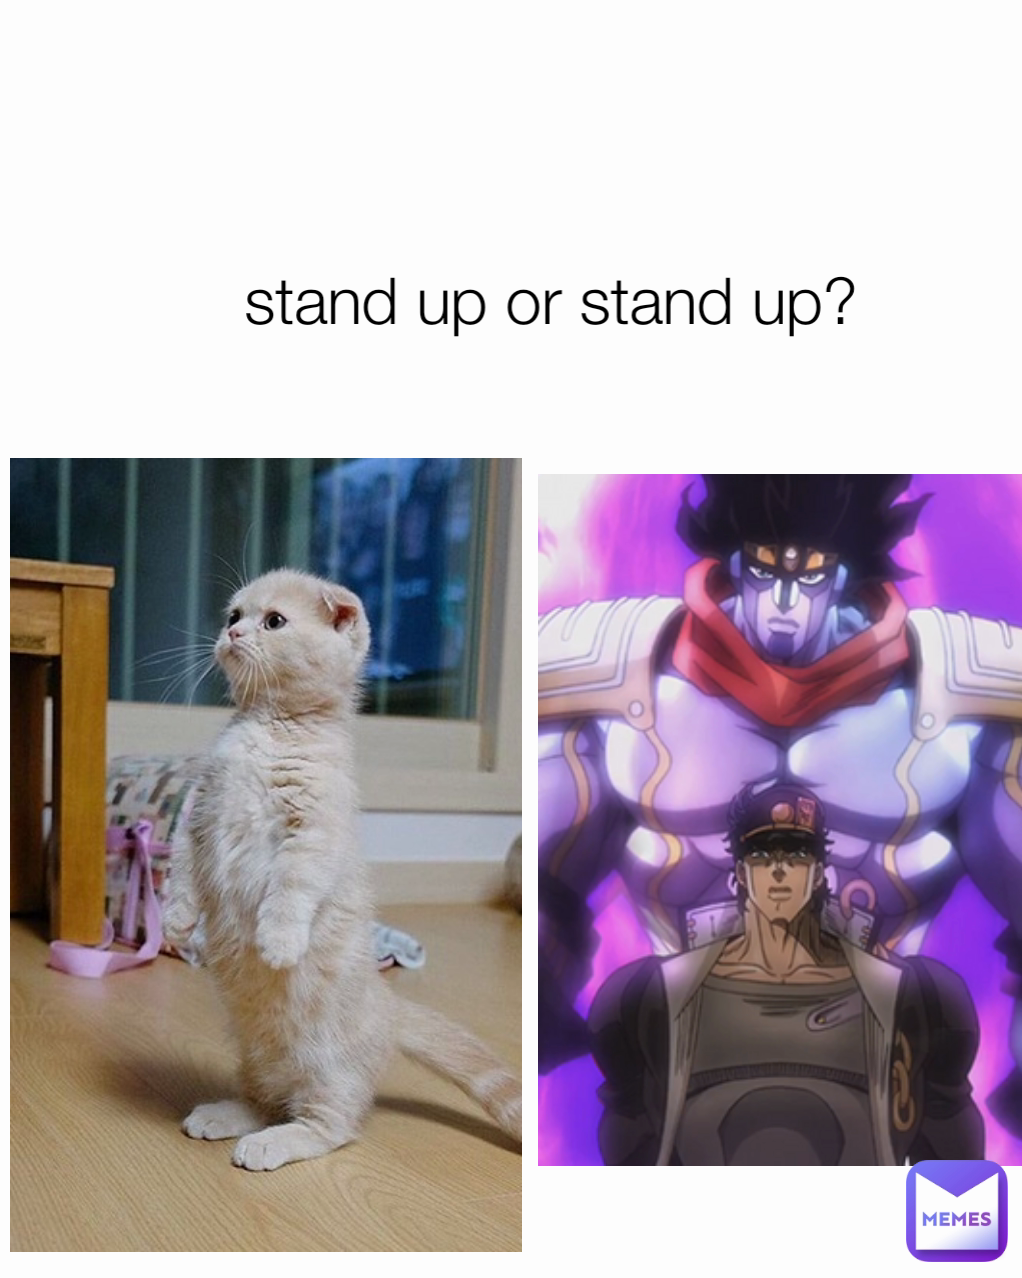 stand up or stand up?